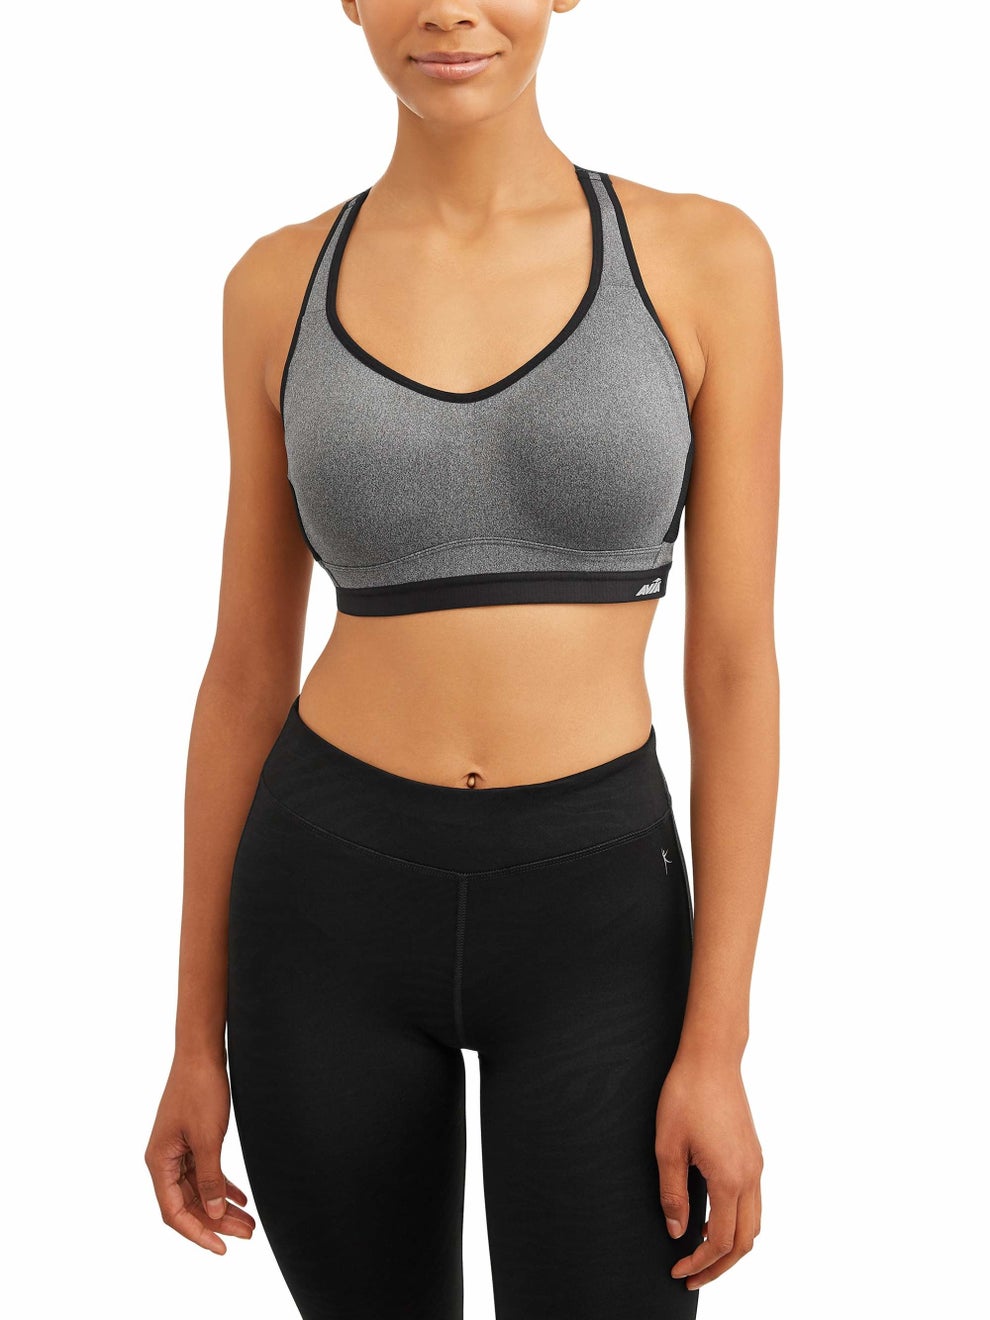 31 Pieces Of Activewear From Walmart That Just Might Get You Excited For  The Gym